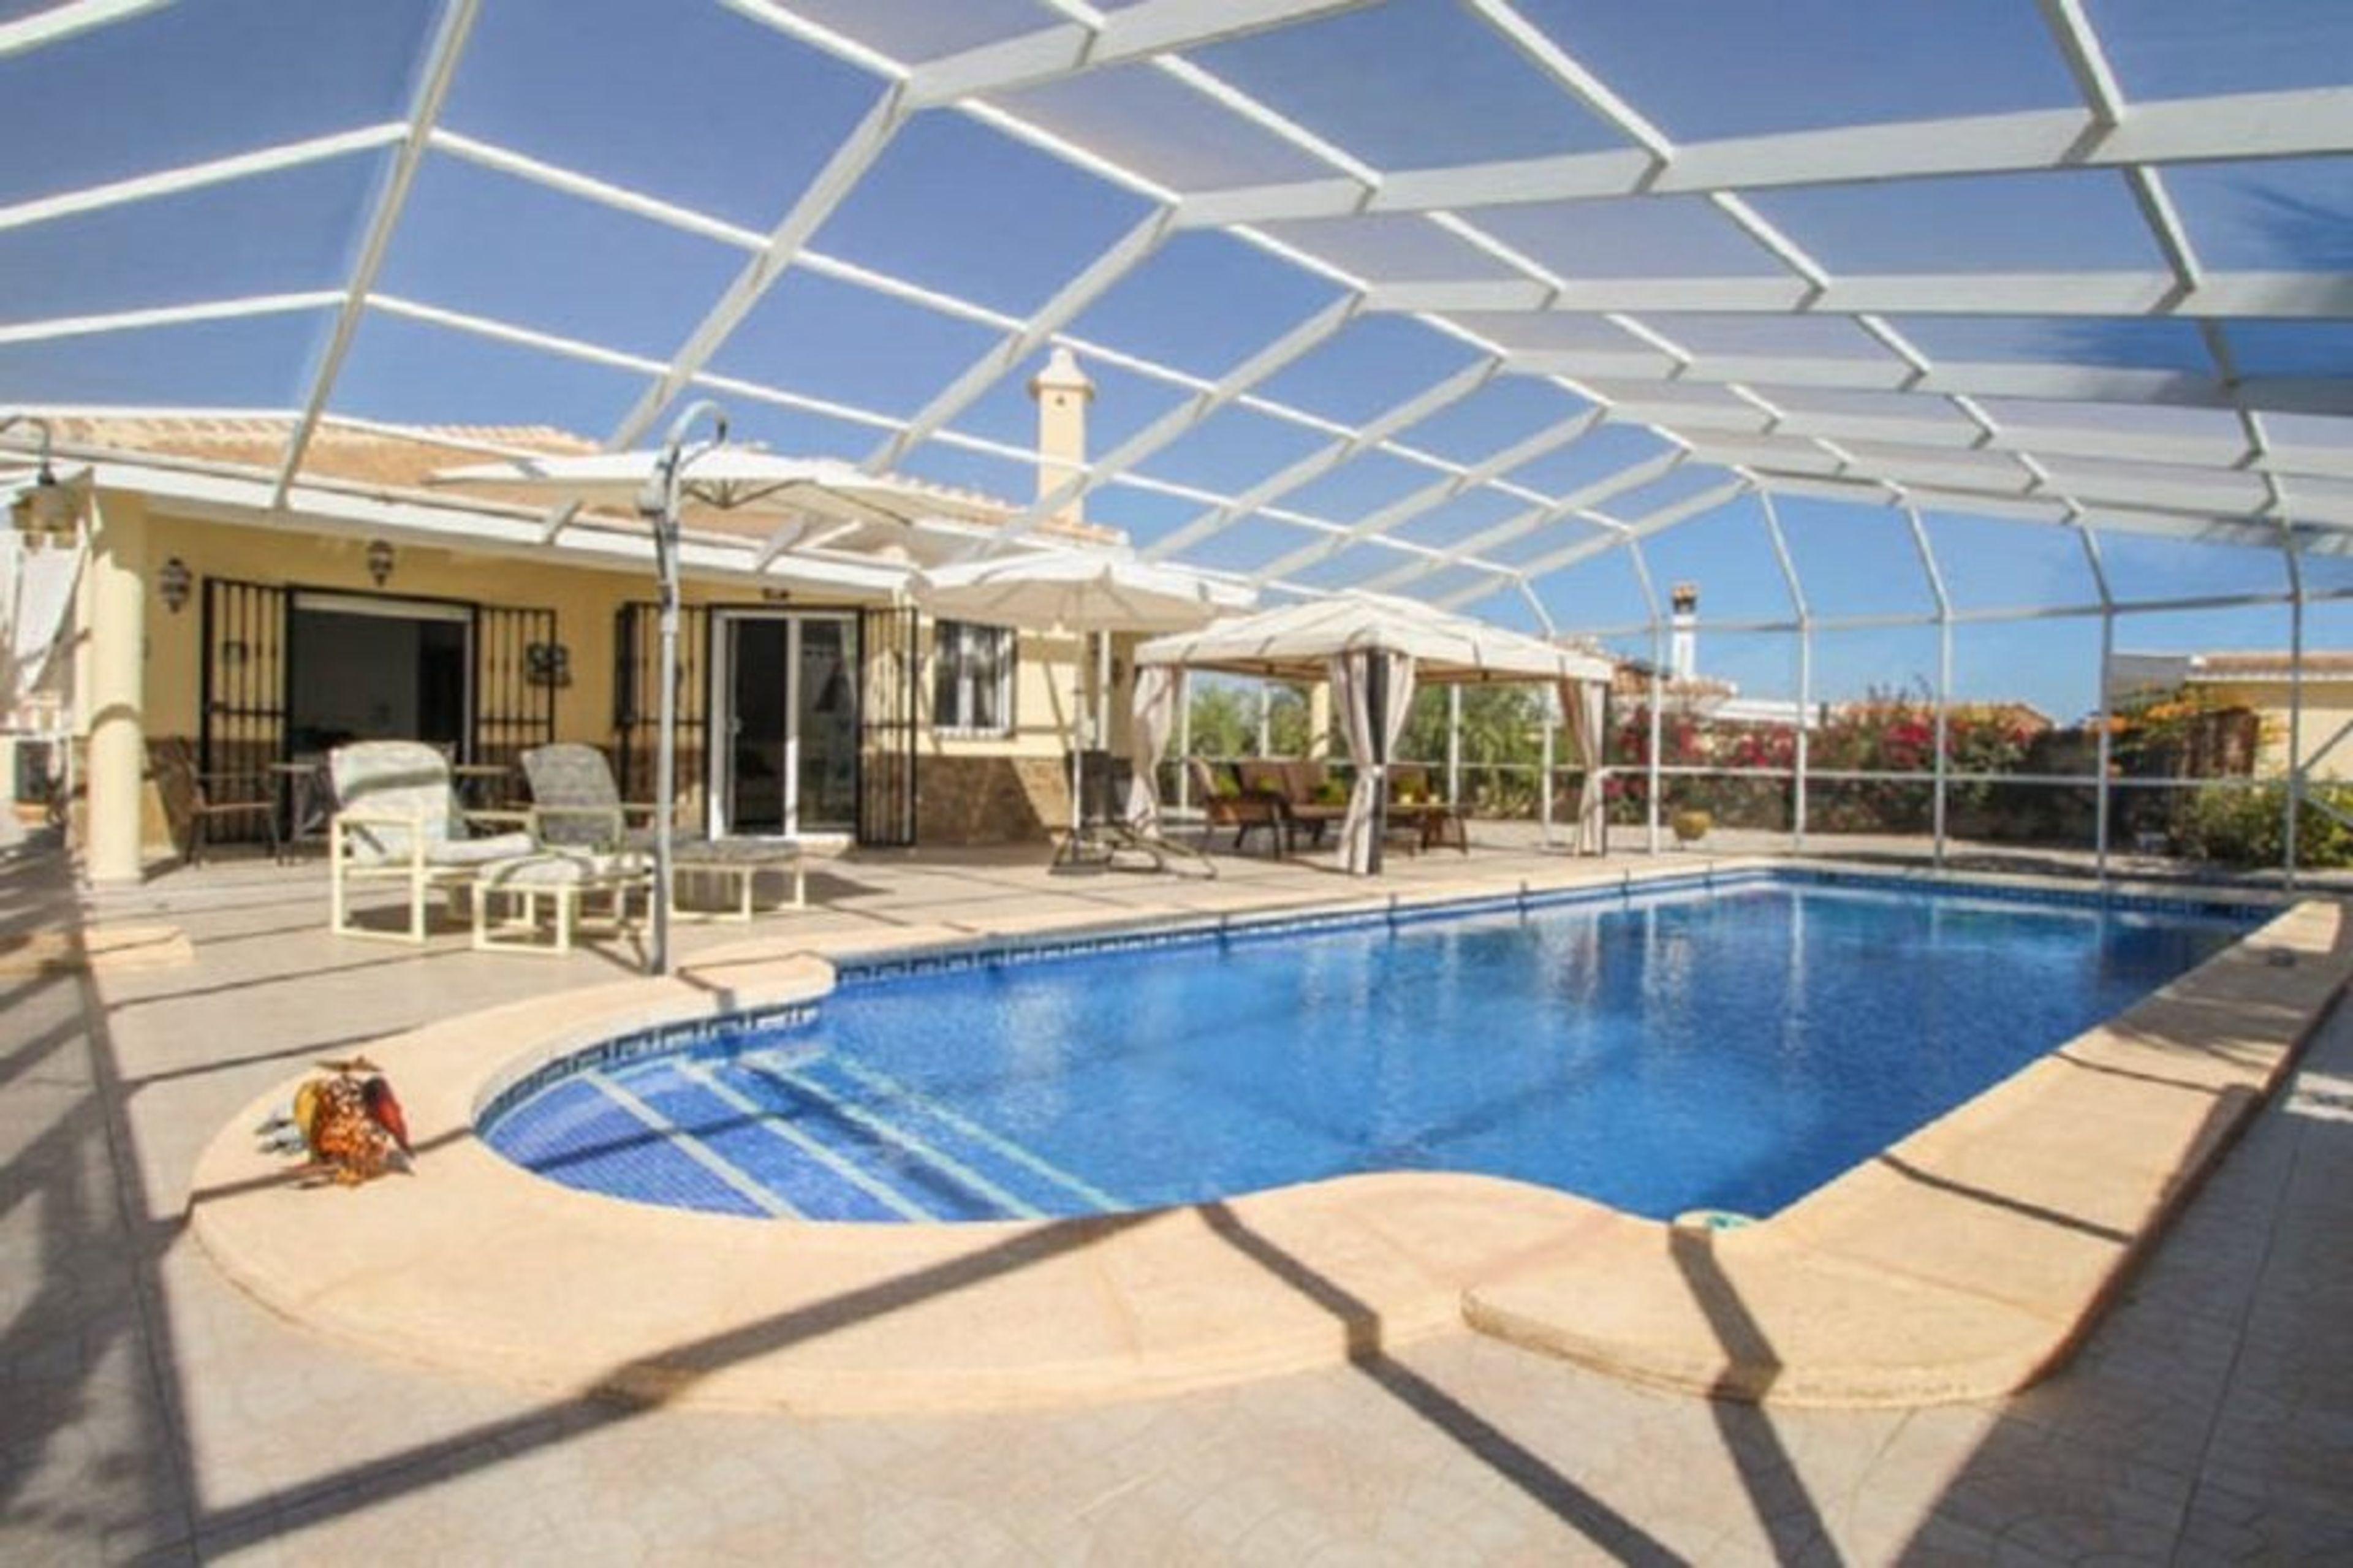 10 x 4 meter pool with plenty of tables, chairs and lounges. 